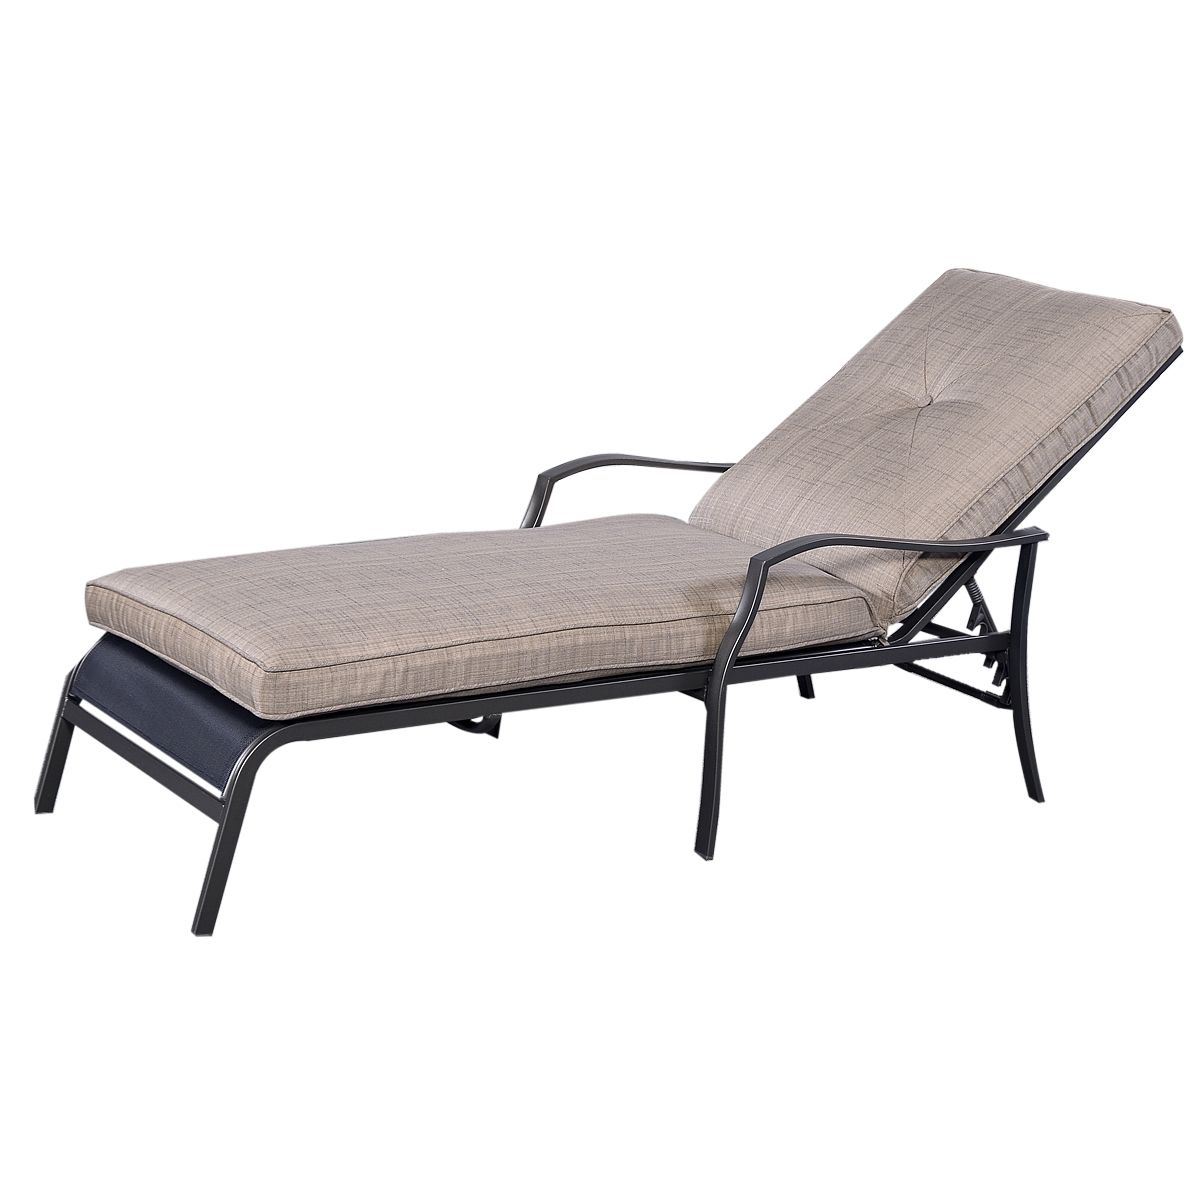 Adjustable Pool Chaise Lounge Chair Recliners Regarding 2018 Lounge Chair : Lounge Chair Pool Furniture Plastic Pool Loungers (View 5 of 15)